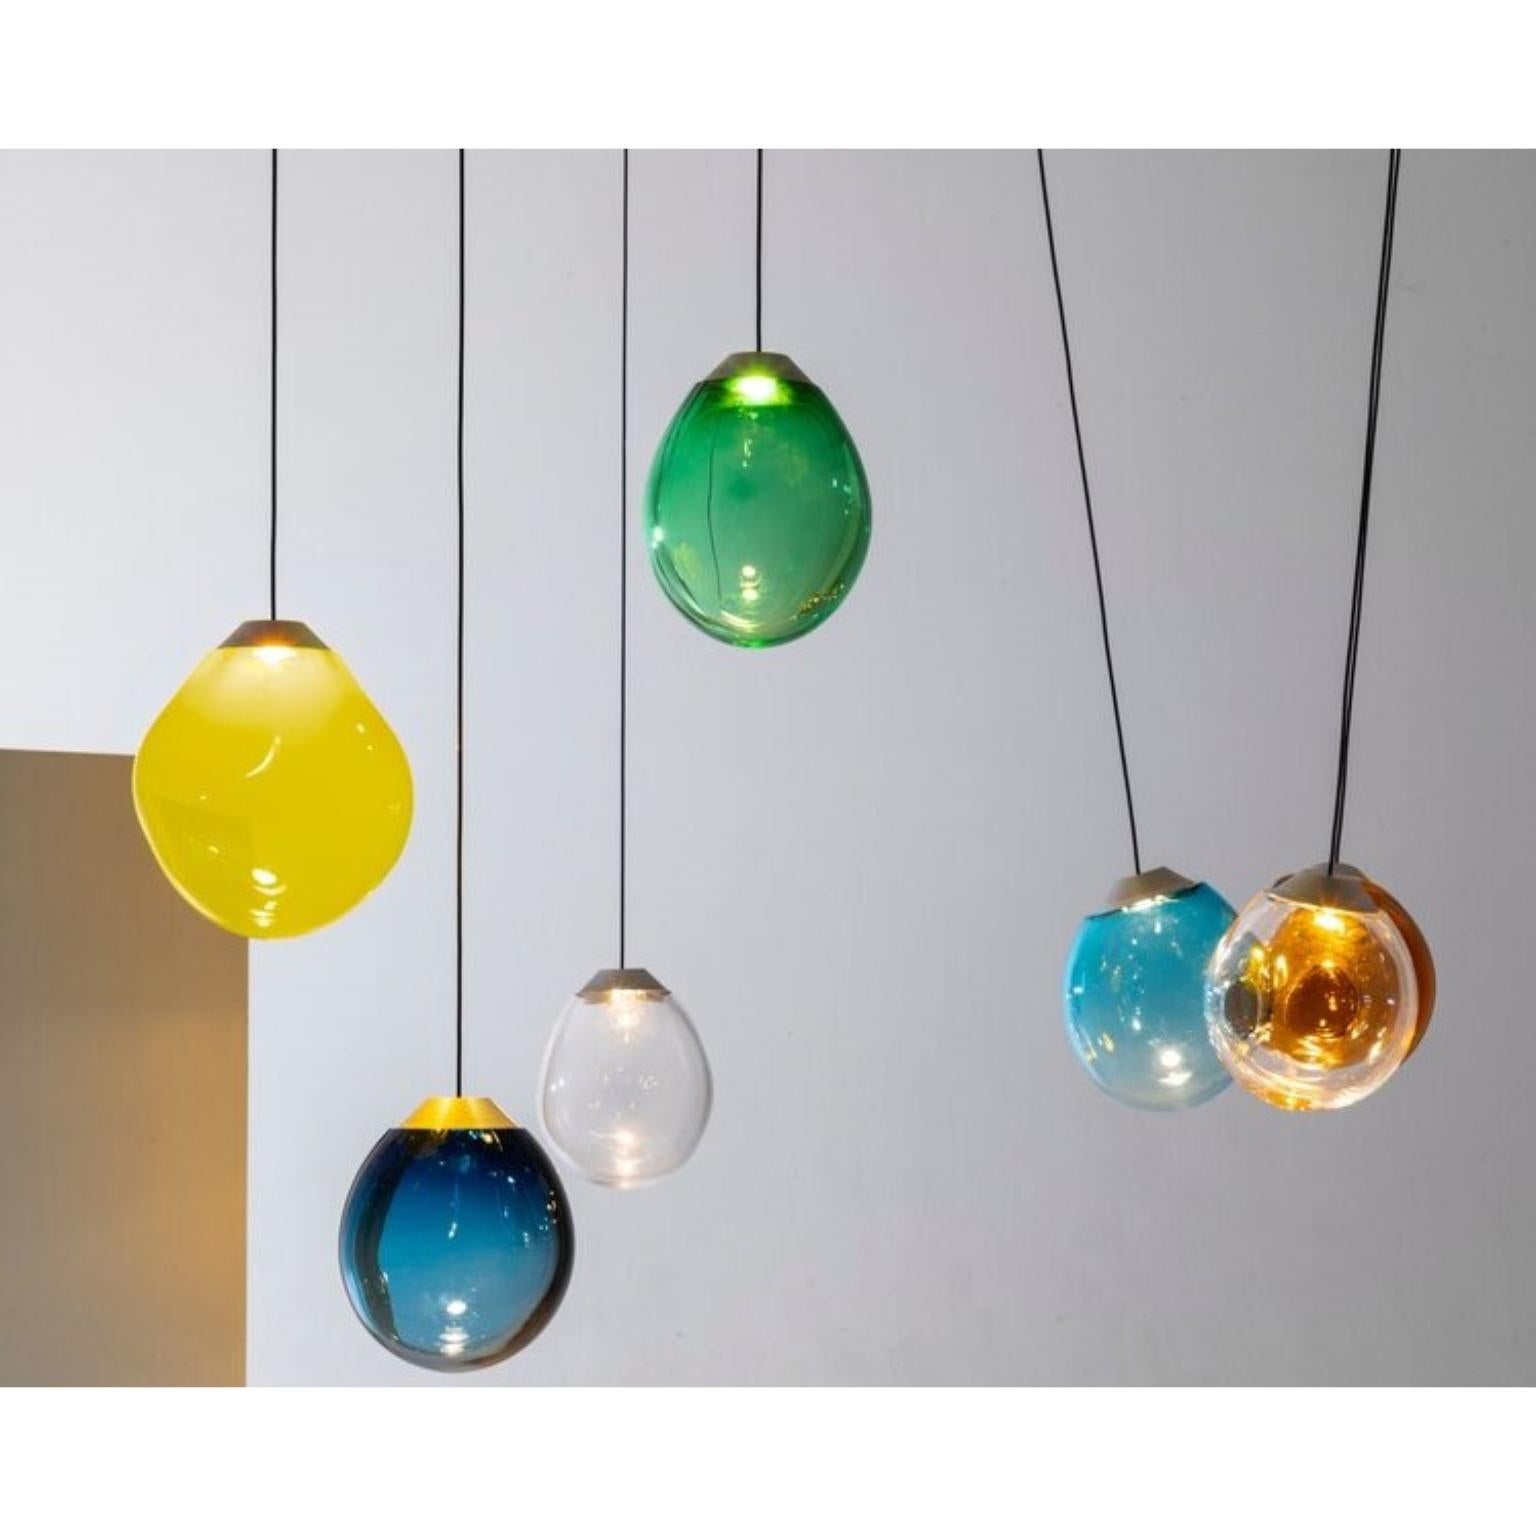 Colored triple momentum blown glass pendants by Alex de Witte
Dimensions: 50 -70 cm
Materials: Mouth blown glass

With the Momentum Alex de Witte has found the prefect artistic defining moment while playing with the boundaries of glass blowing